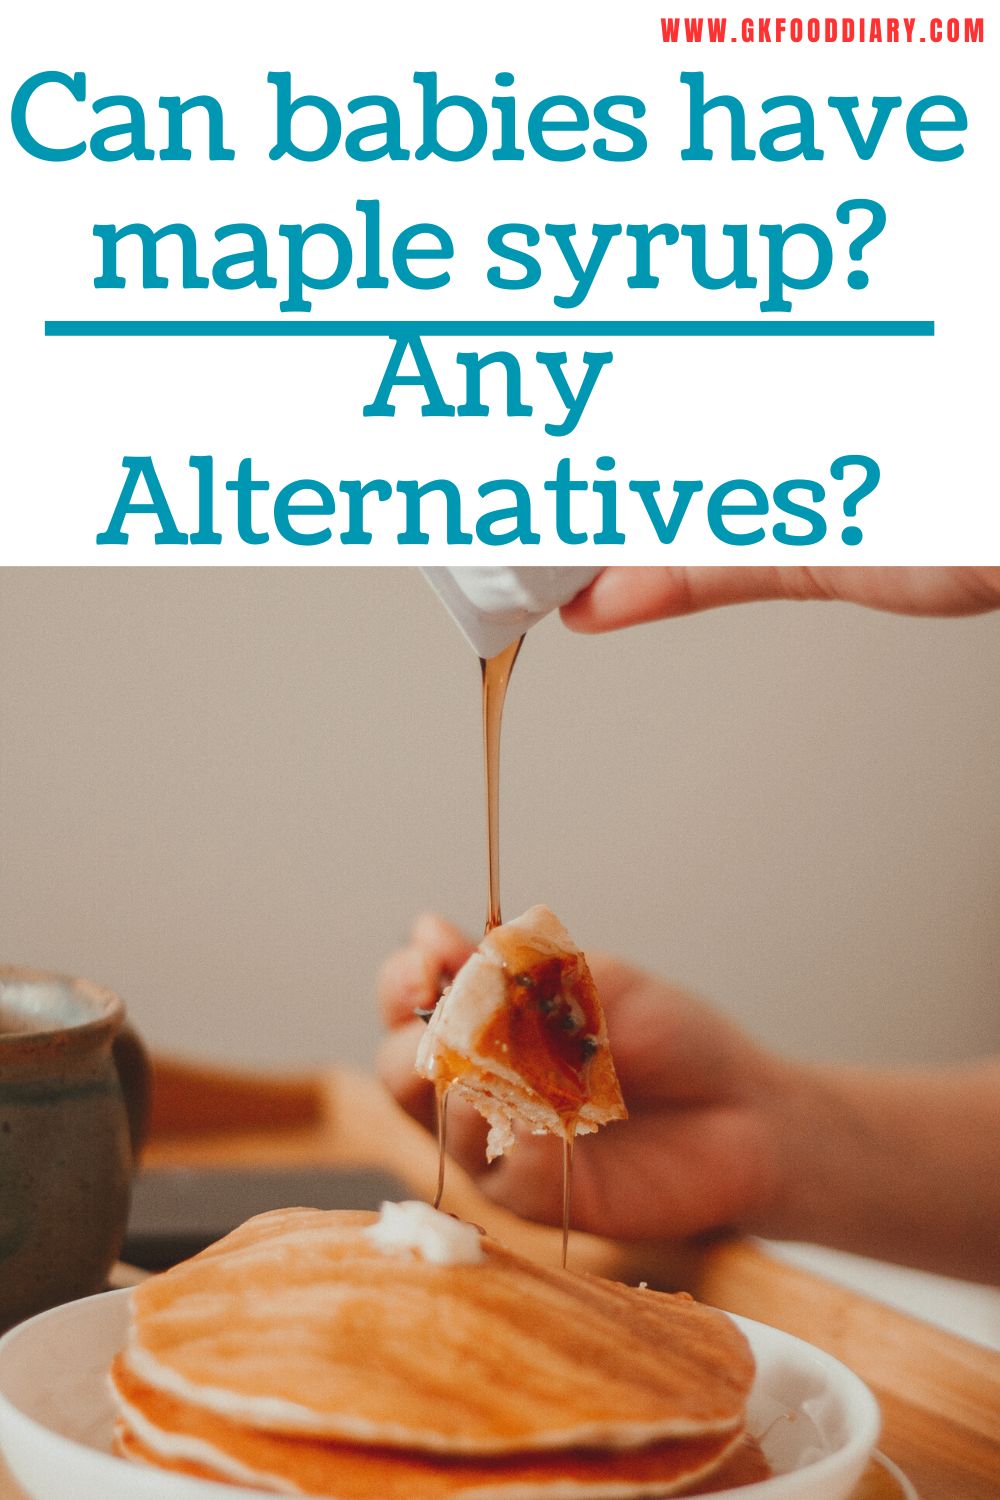 Can babies have maple syrup Any Alternatives